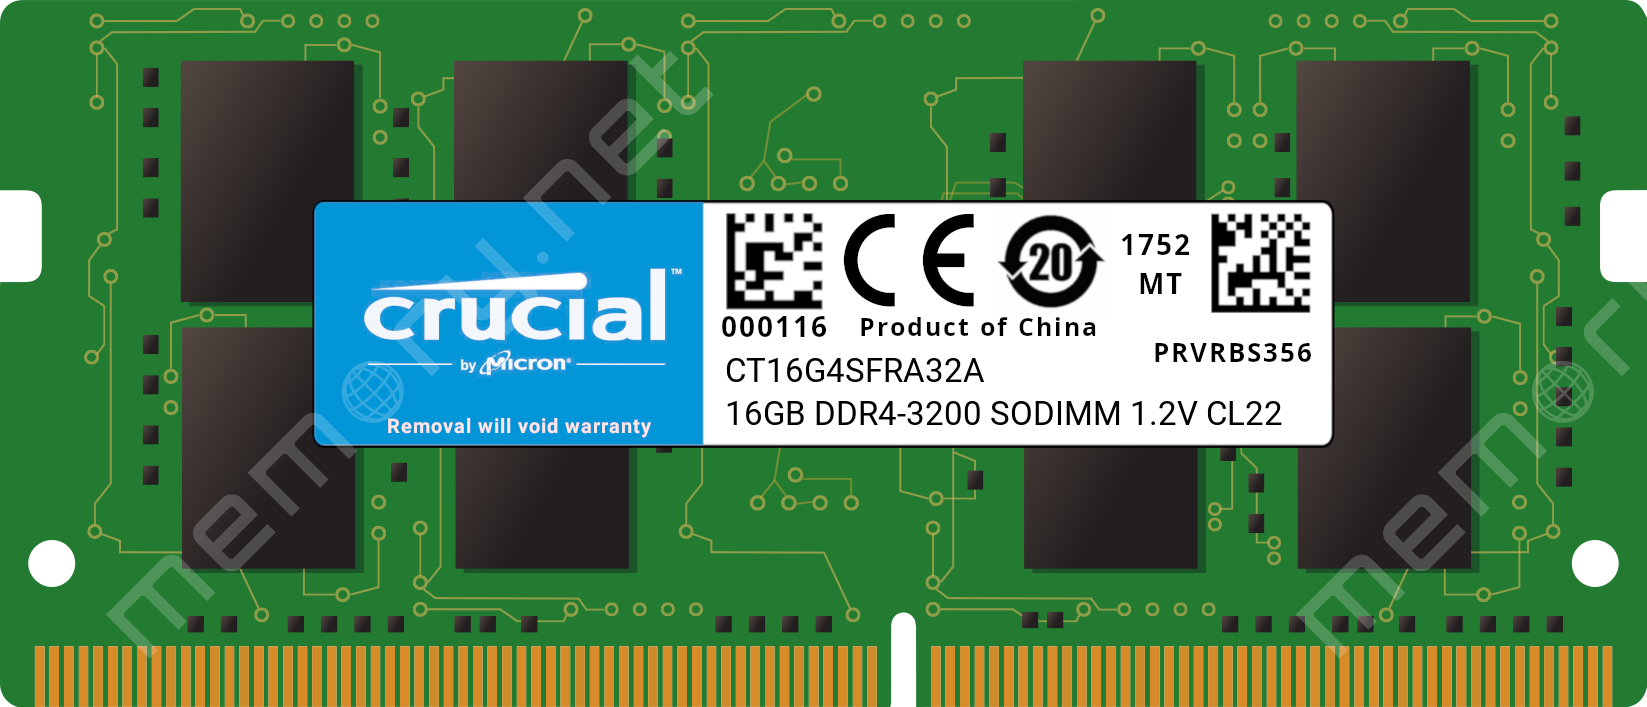 Does anyone use 16GB Crucial CT16G4SFRA32A in your DS 920+? Or how